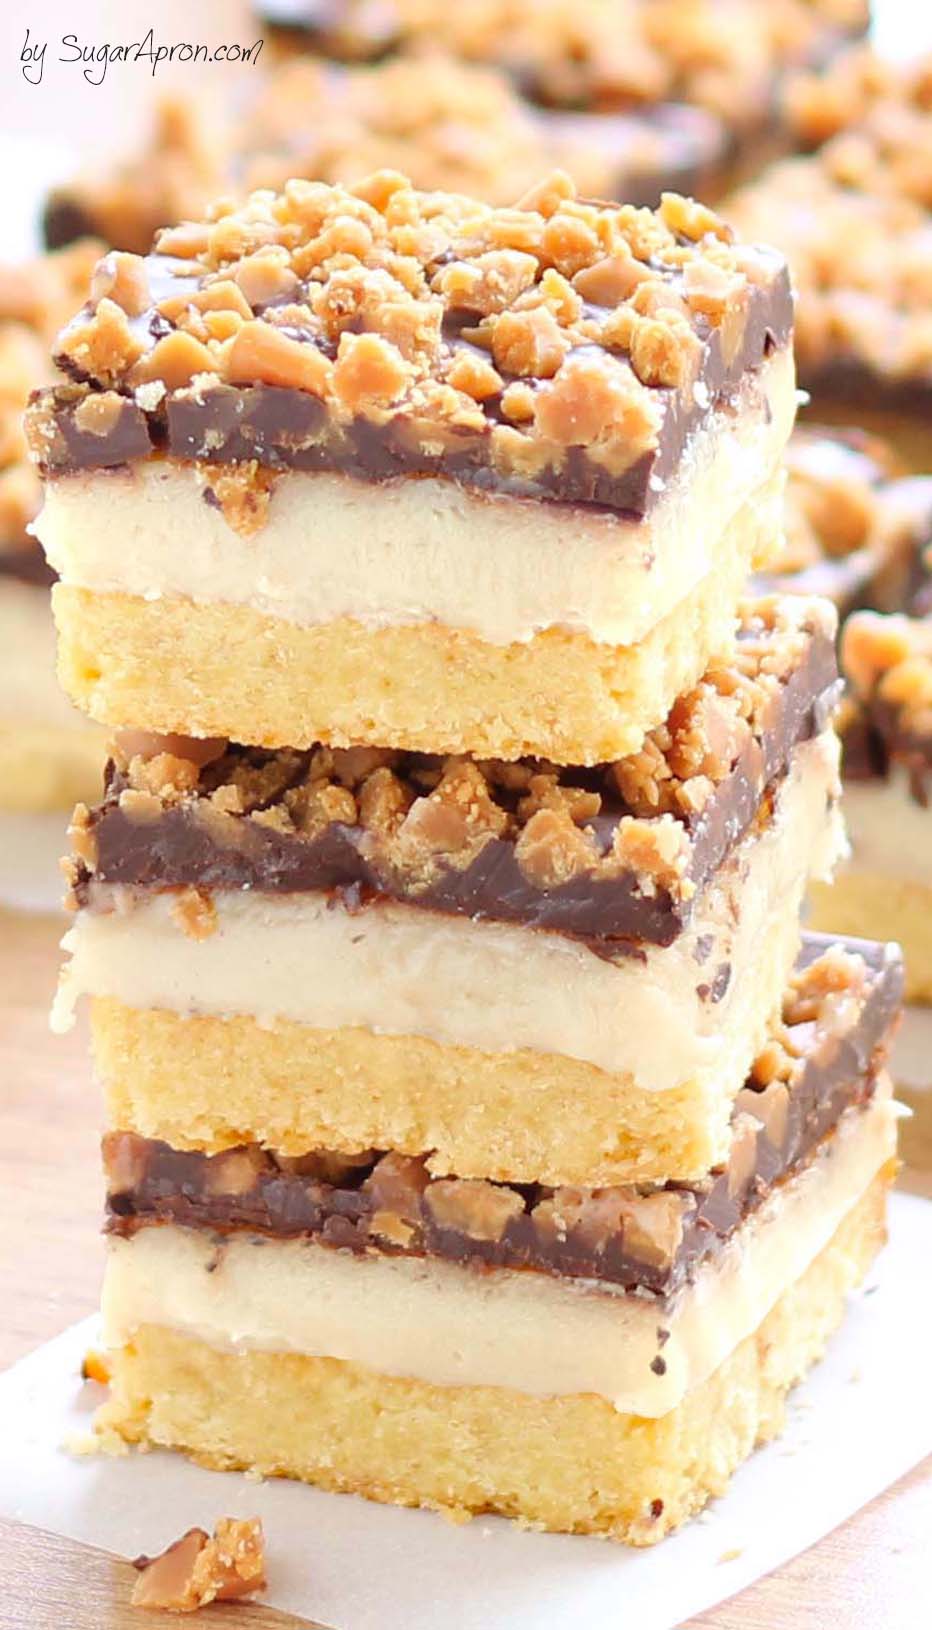 Make these chocolate toffee bars for your next party and you’ll be invited back! The sweetened condensed milk and chocolate toffee bits flavor combination makes this the perfect sweet treat.